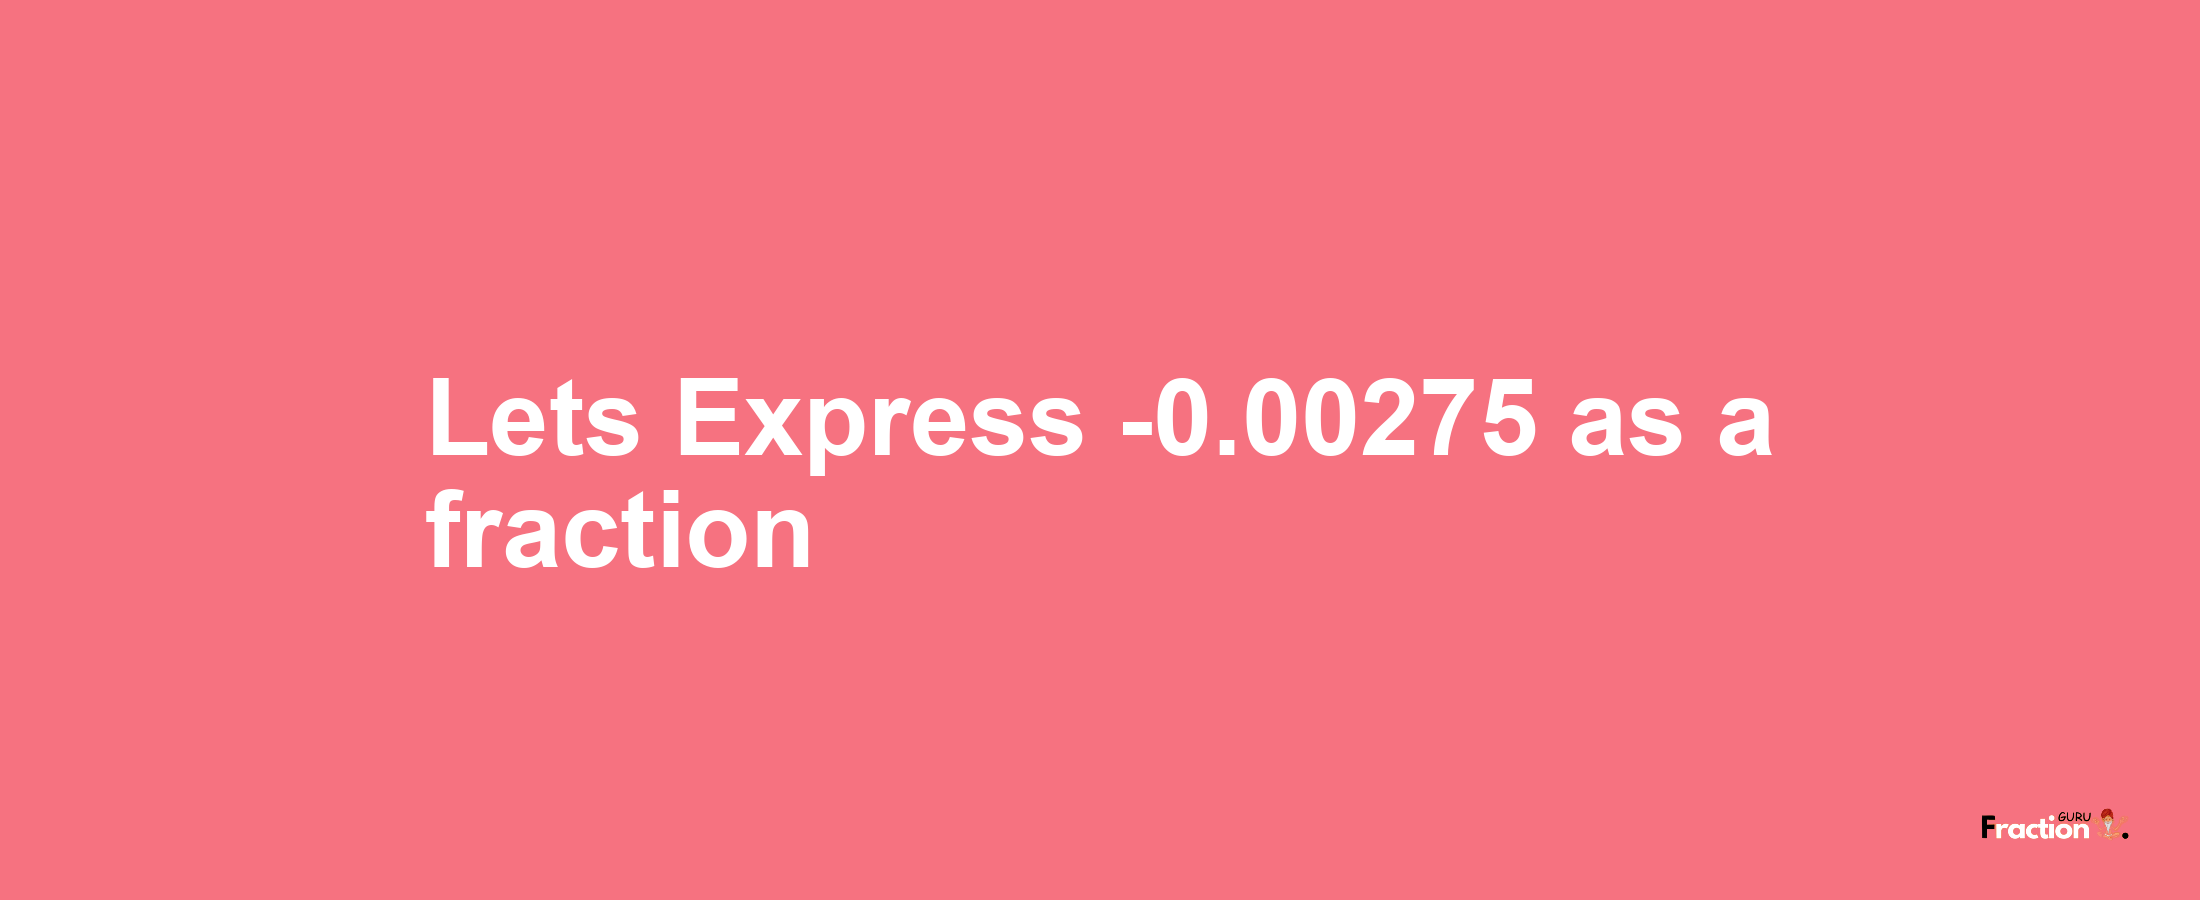 Lets Express -0.00275 as afraction